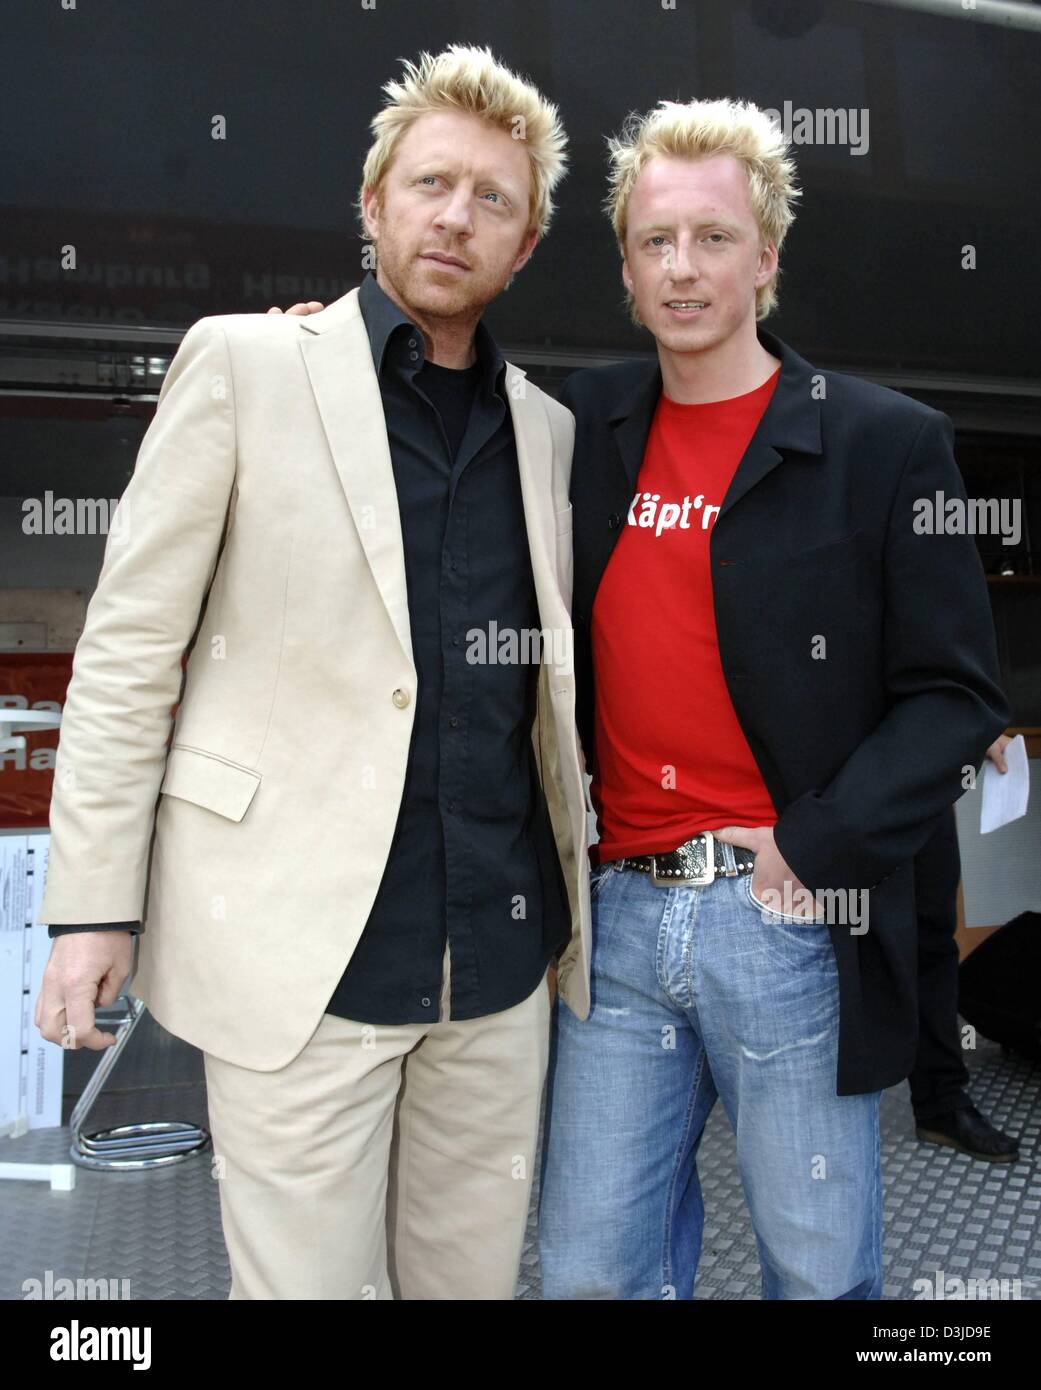 (dpa) - German tennis legend Boris Becker (L) and his look-alike Maik Lohmann pose together at the ATP Tennis Masters in Hamburg, Germany, Friday 13 May 2005. Becker is the tournament's chairman. Lohmann plays Becker's look-alike in a German TV ad. Stock Photo